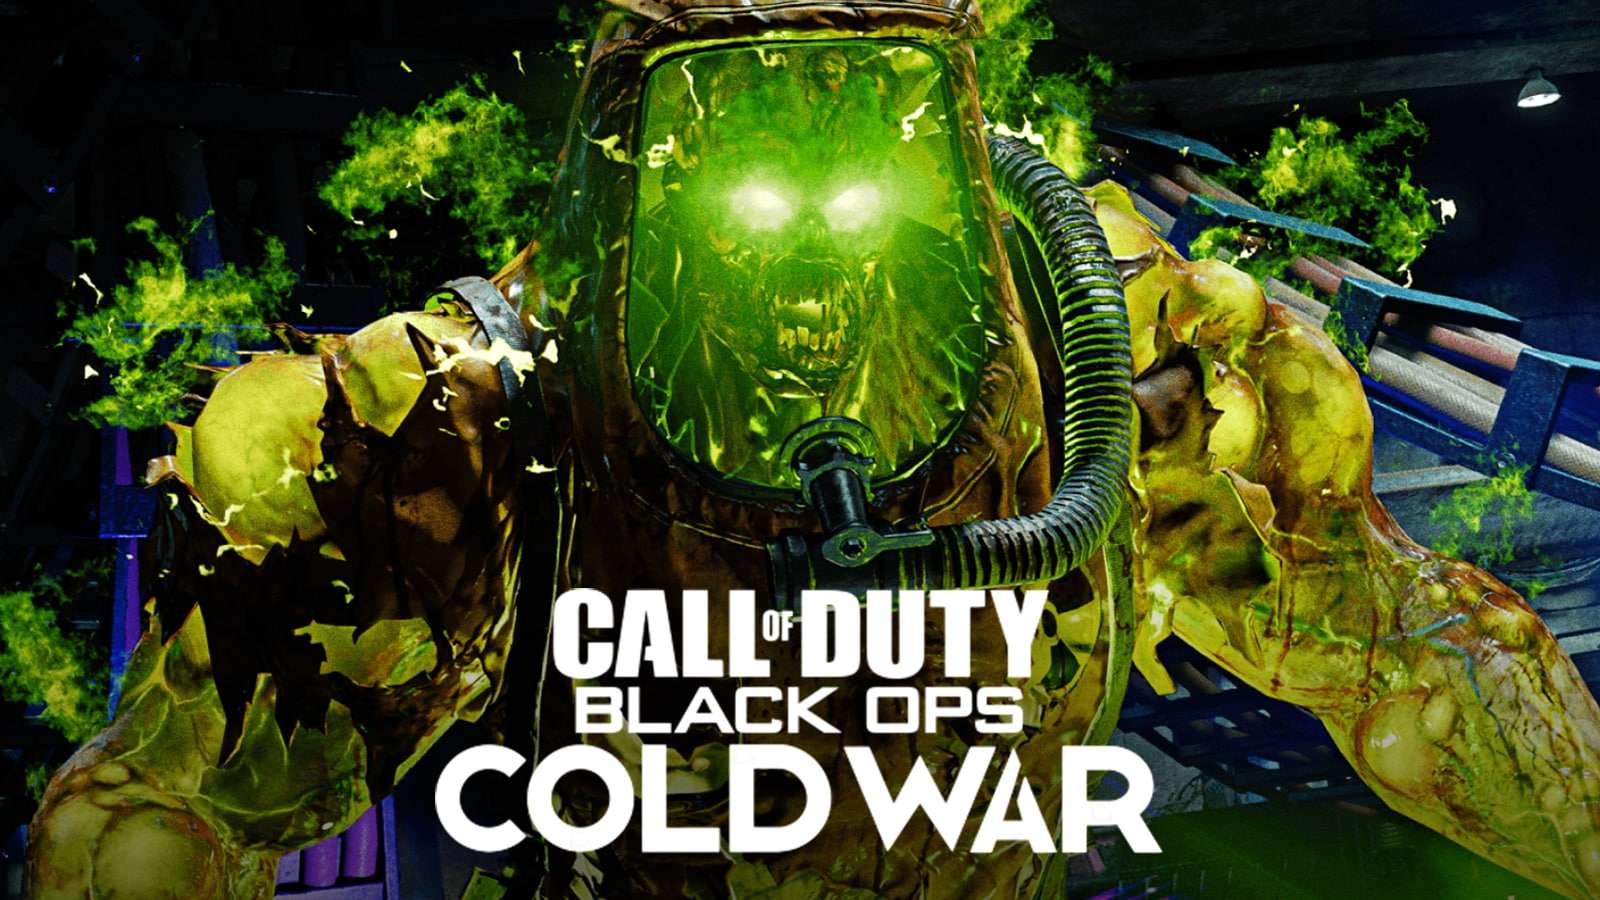 Call of Duty Zombie towers over Black Ops Cold War logo.